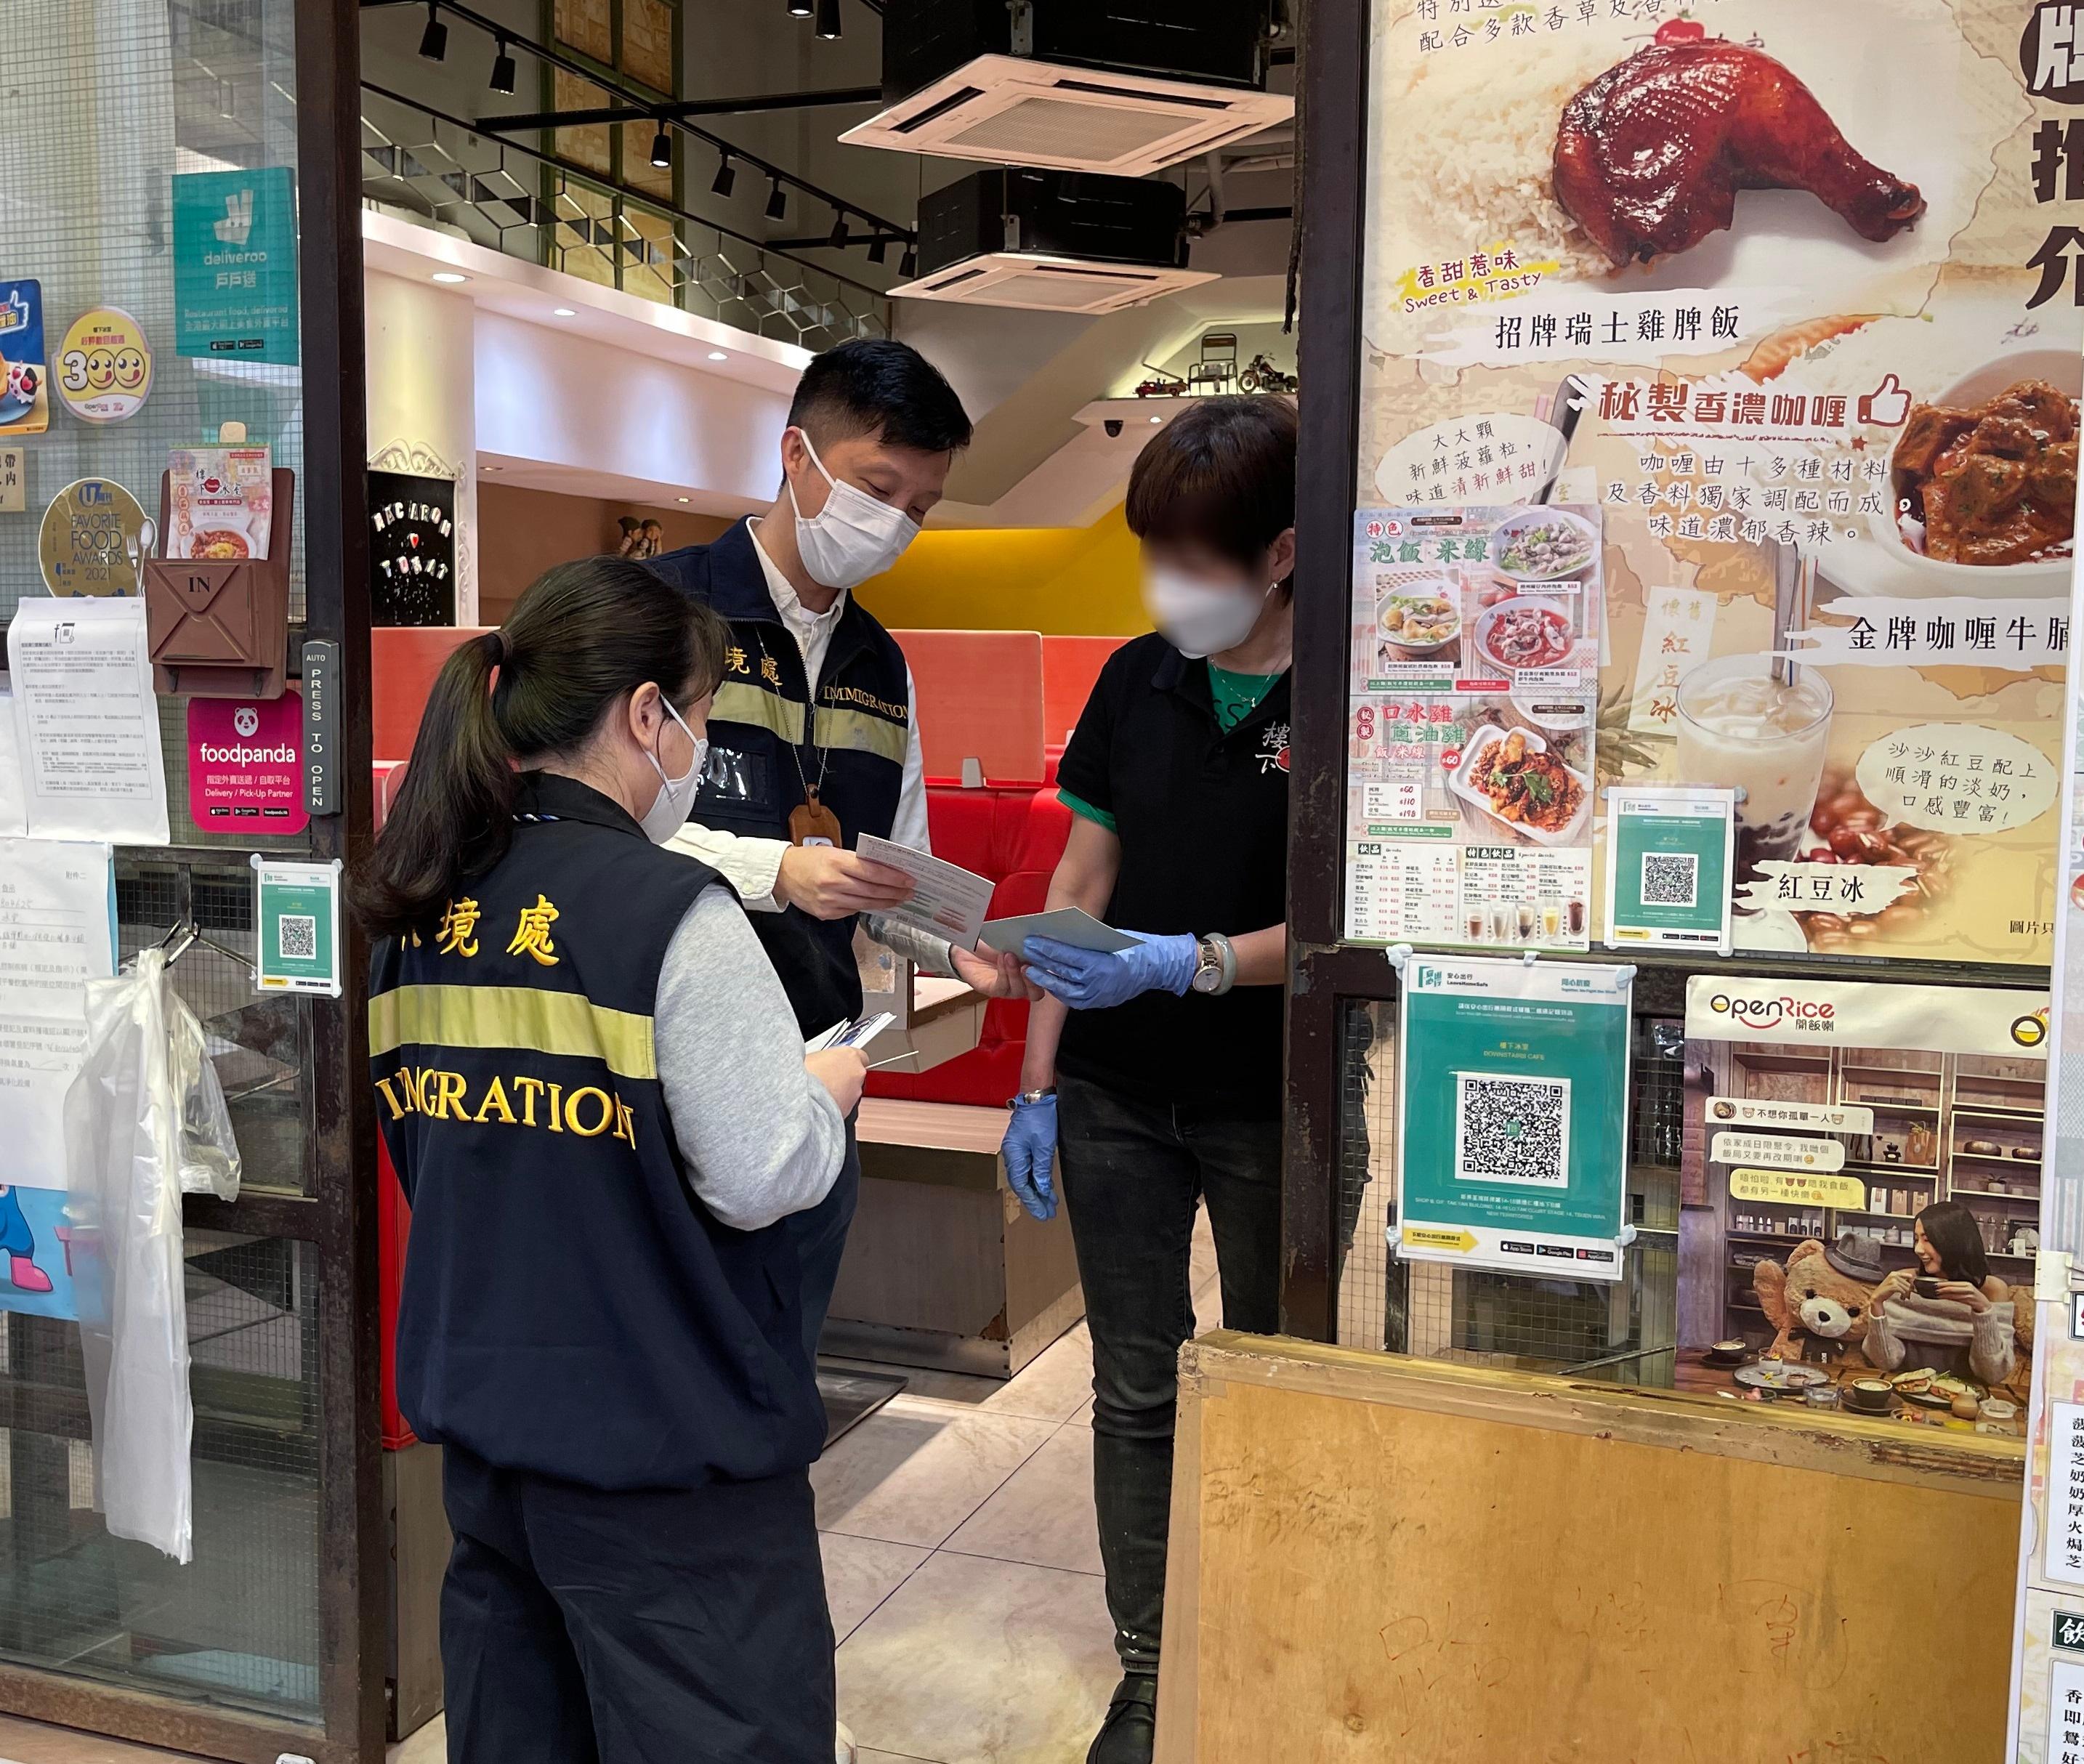 Immigration Task Force Officers distribute "Don't Employ Illegal Workers" leaflets to restaurant staff.